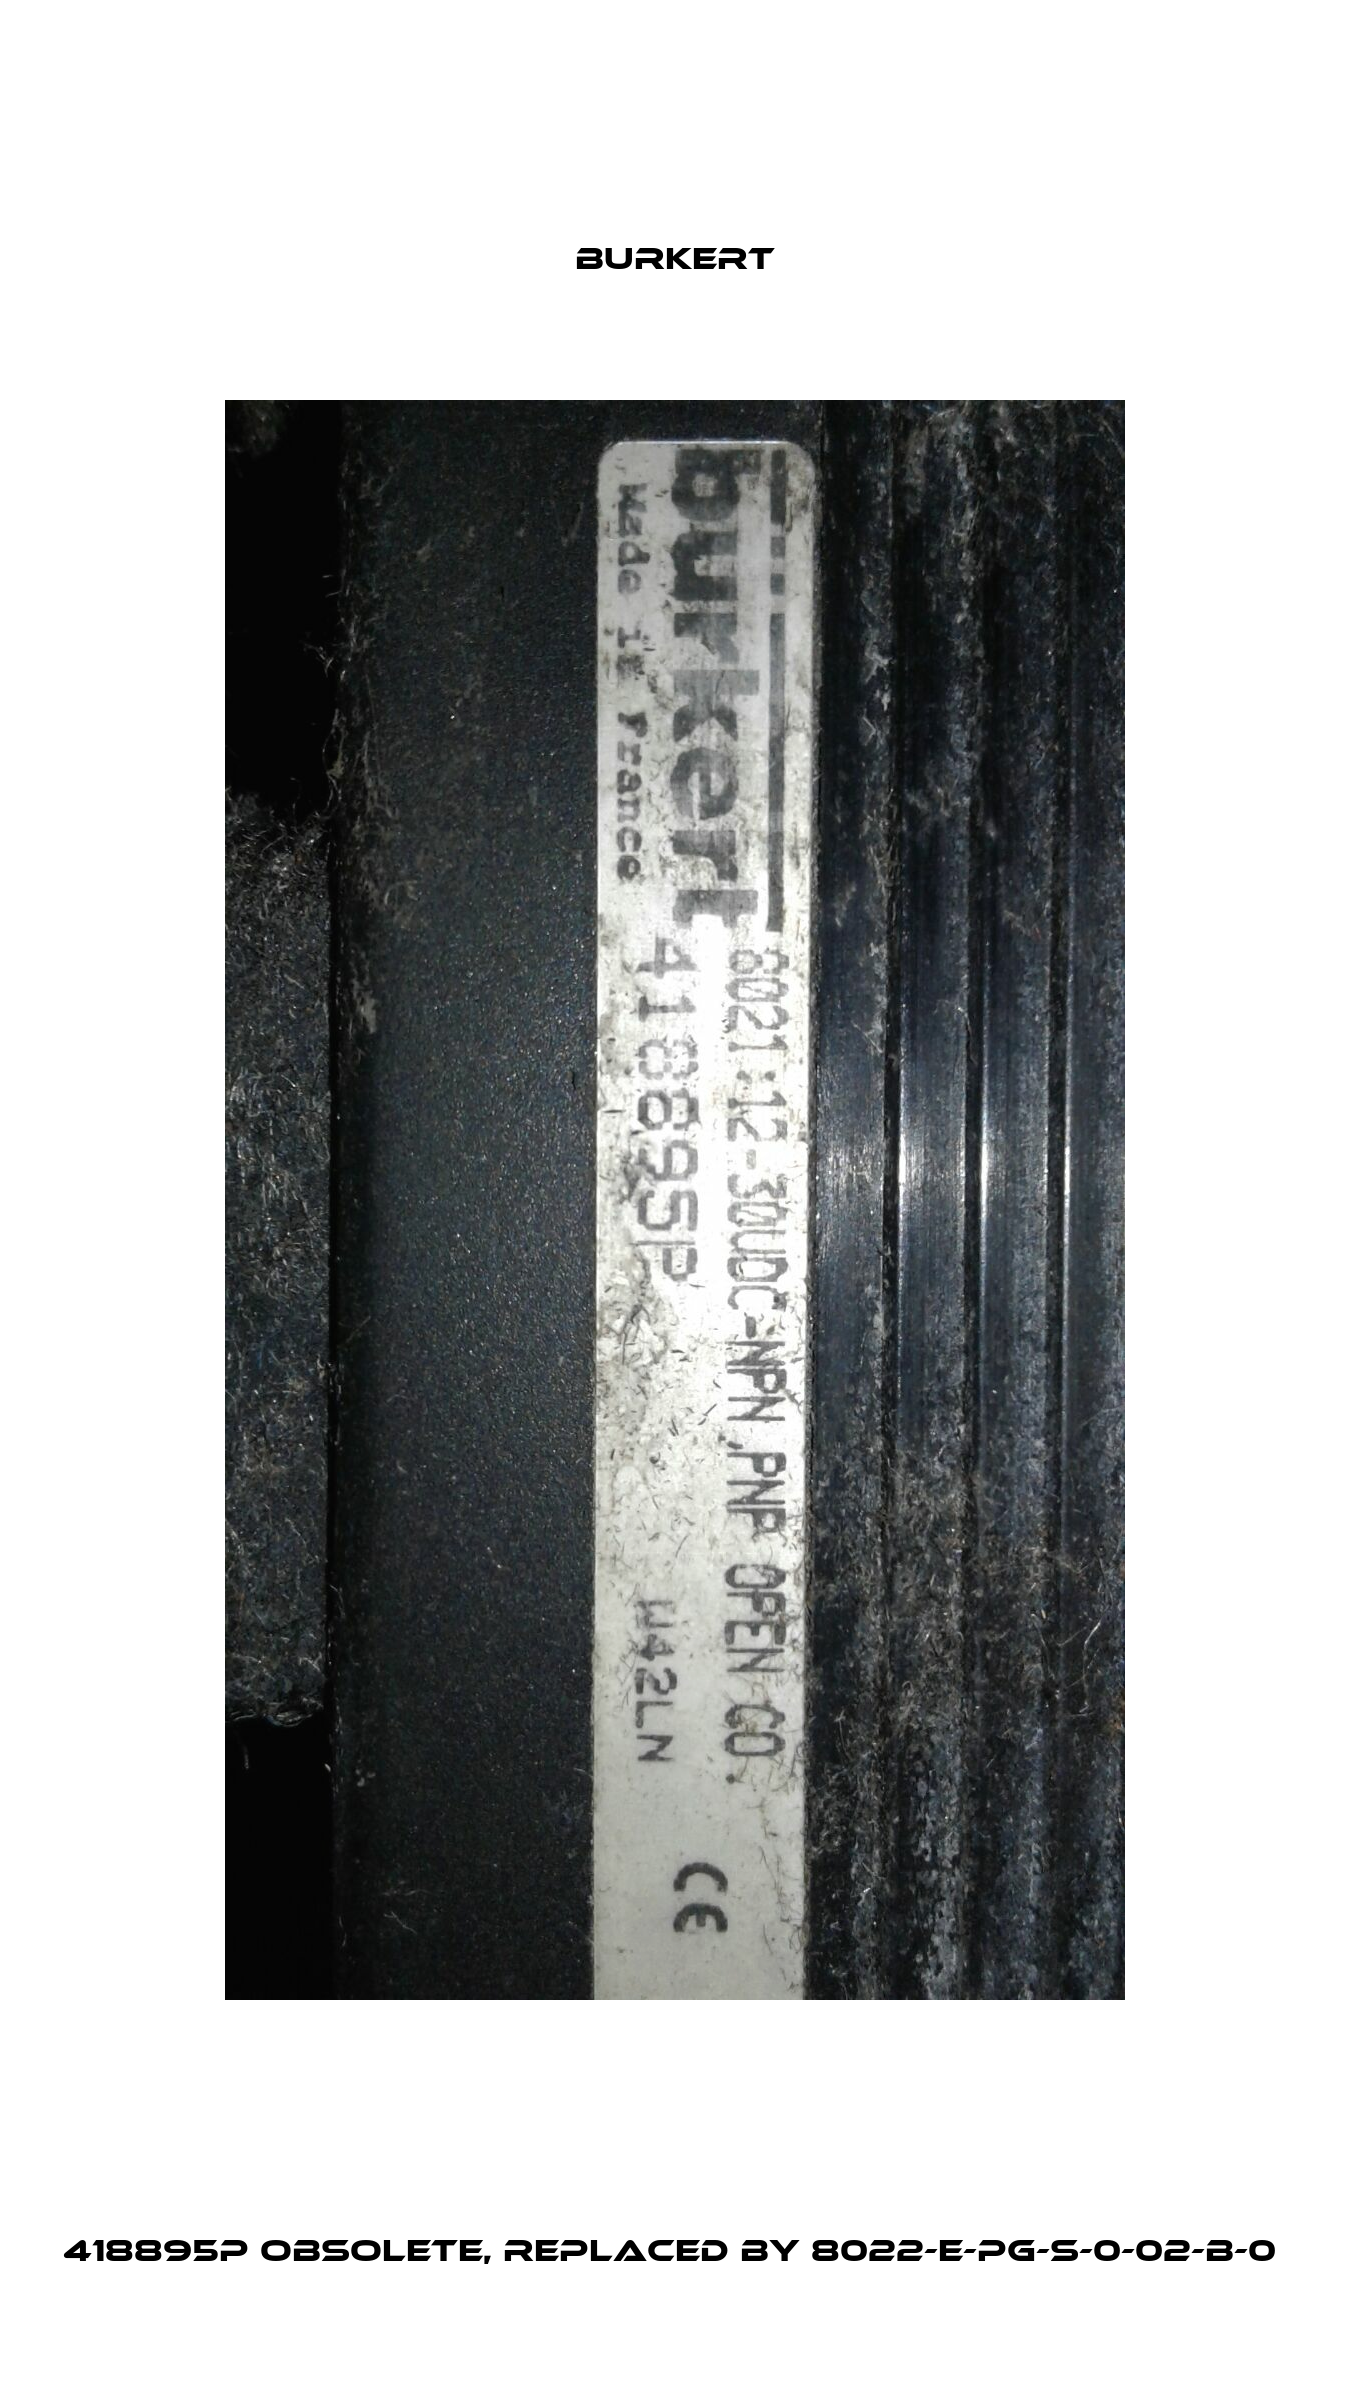 418895P obsolete, replaced by 8022-E-PG-S-0-02-B-0  Burkert